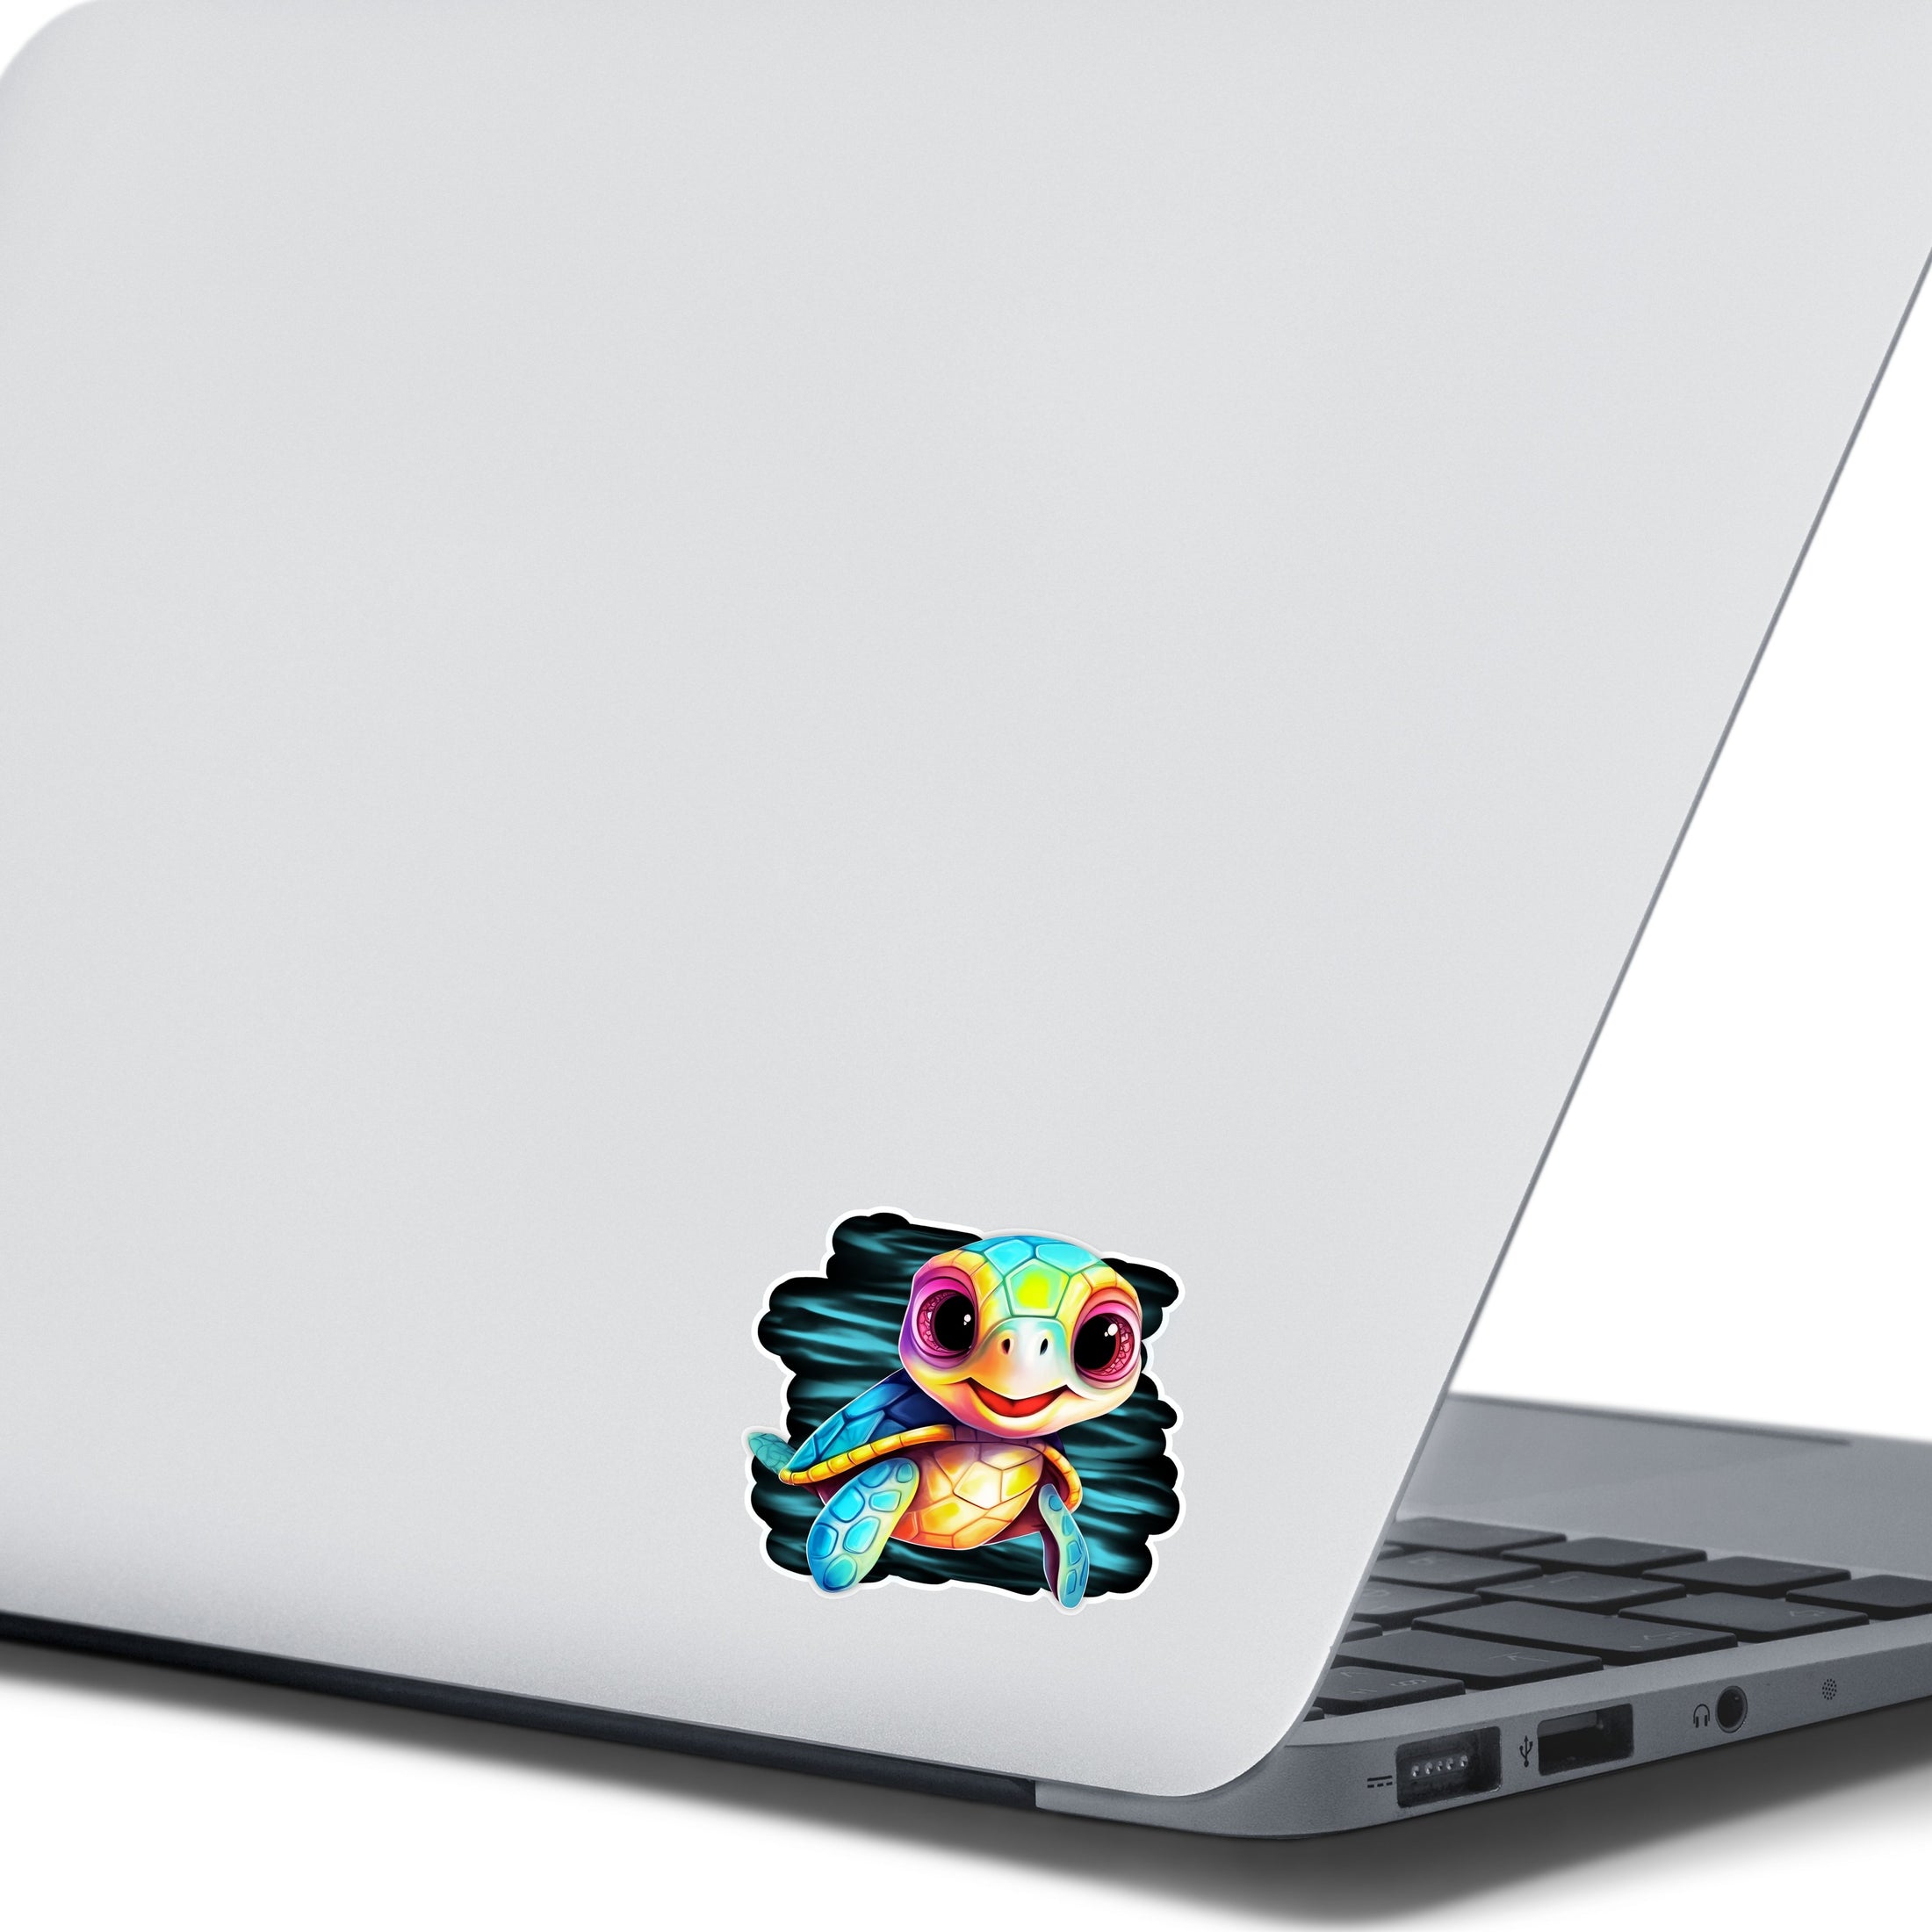 This image shows the baby sea turtle sticker on the back of an open laptop.